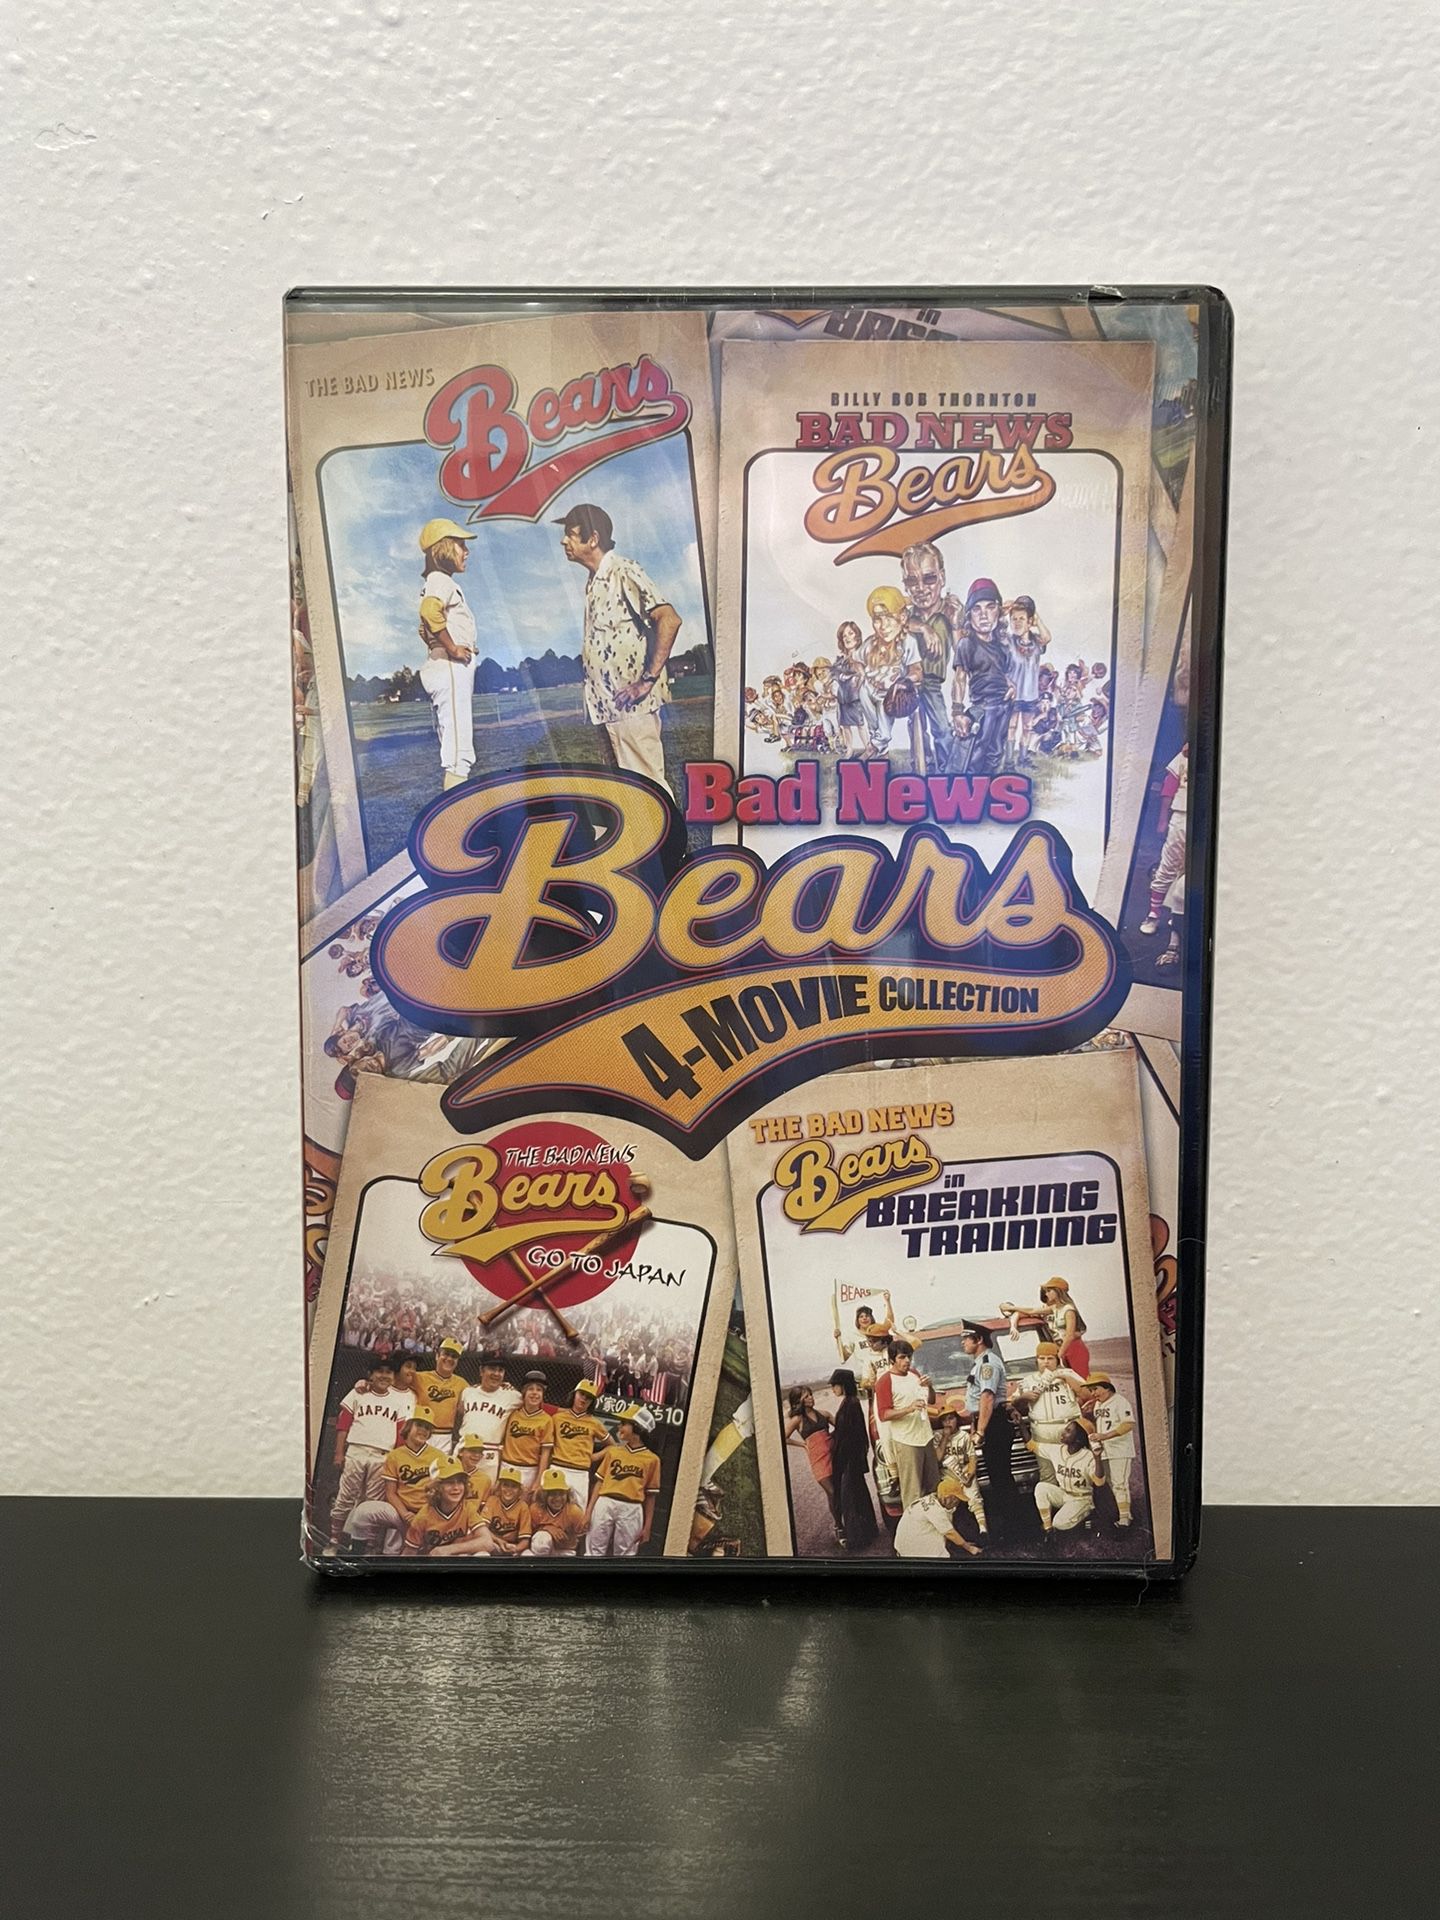 Bad News Bears 4 Movie Collection DVD NEW SEALED Baseball Comedy Movies